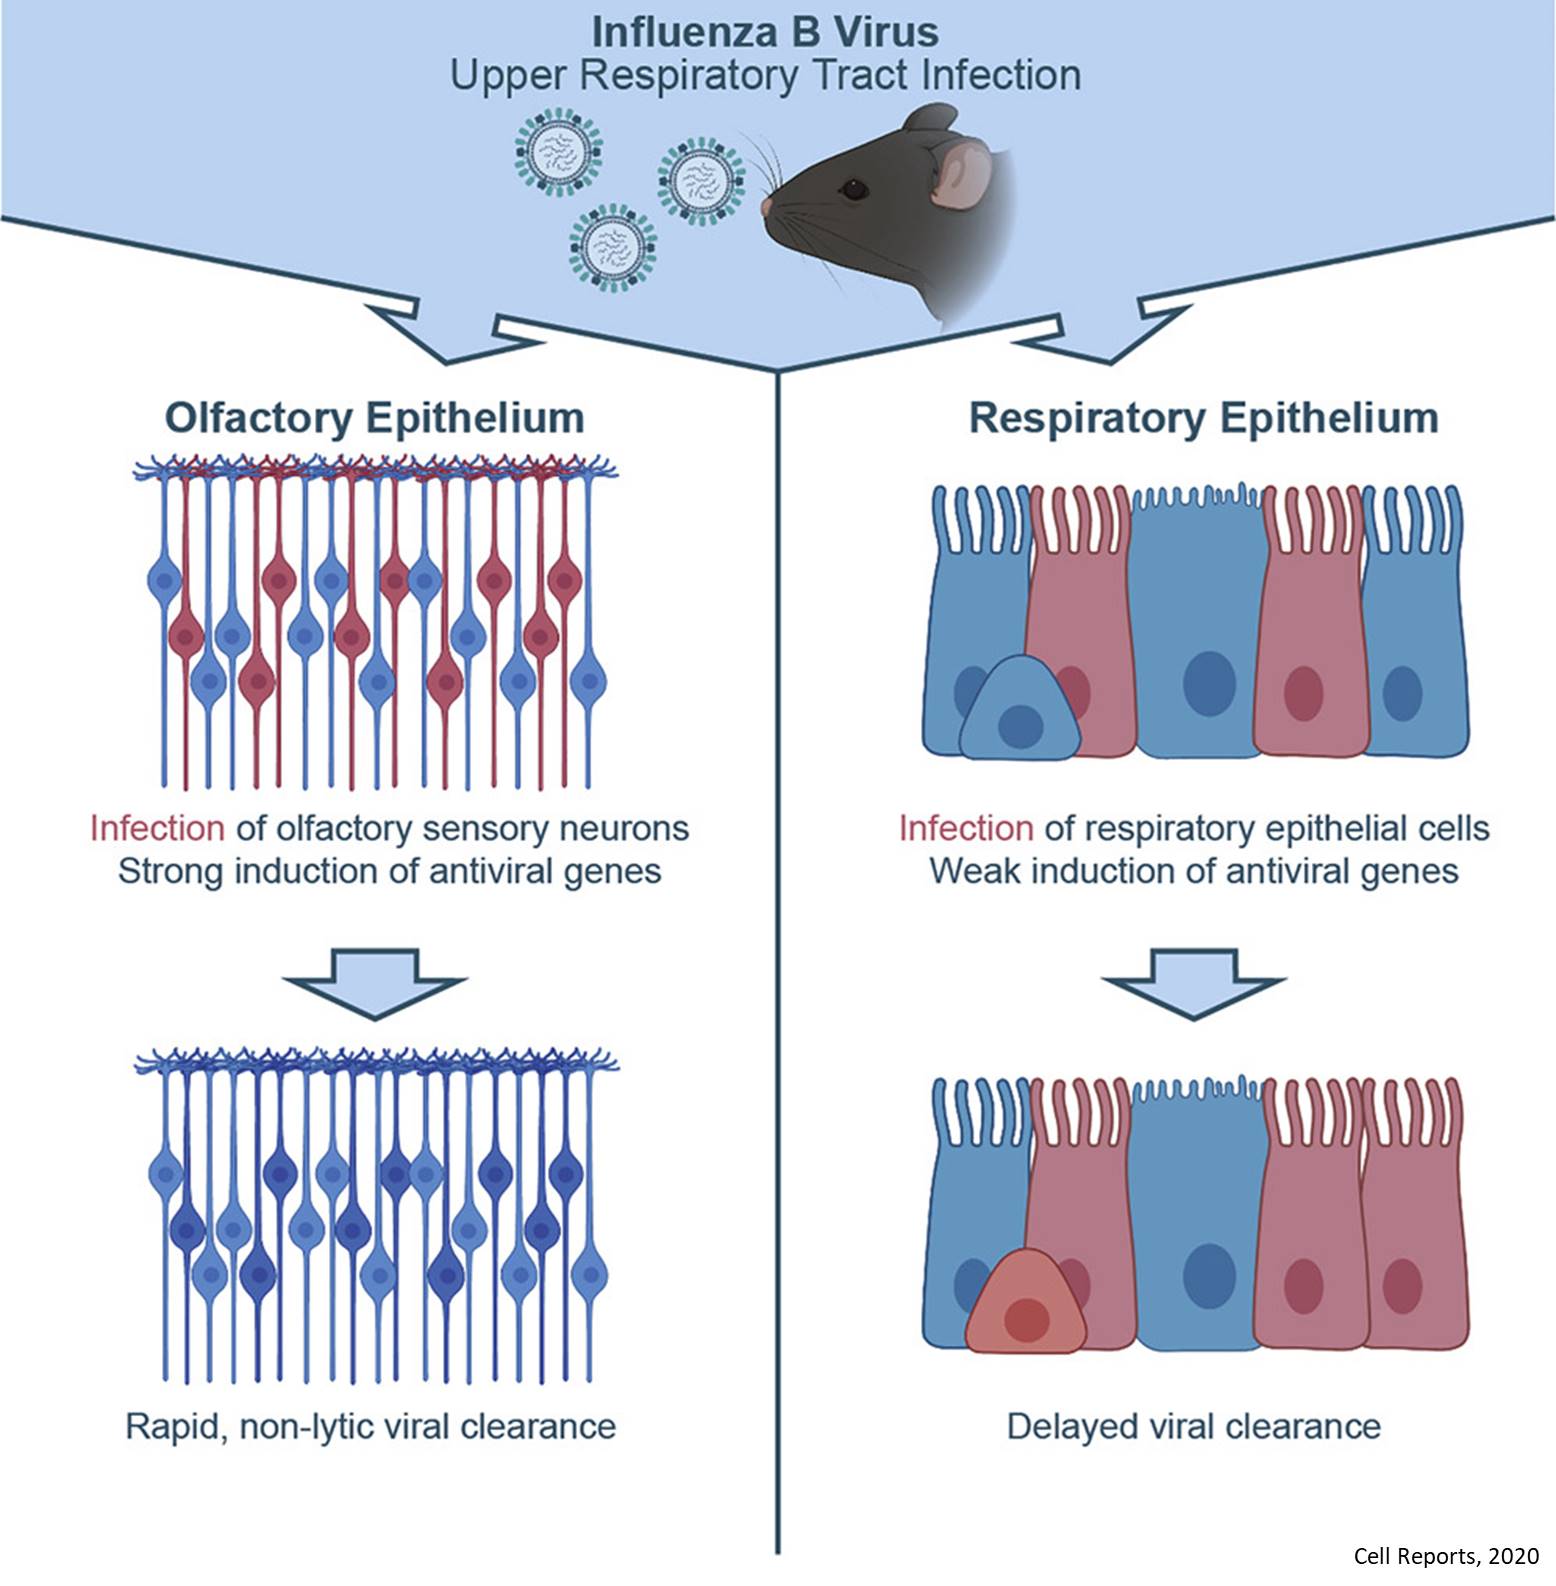 Why olfactory neurons in the upper respiratory tract are resistant to influenza?